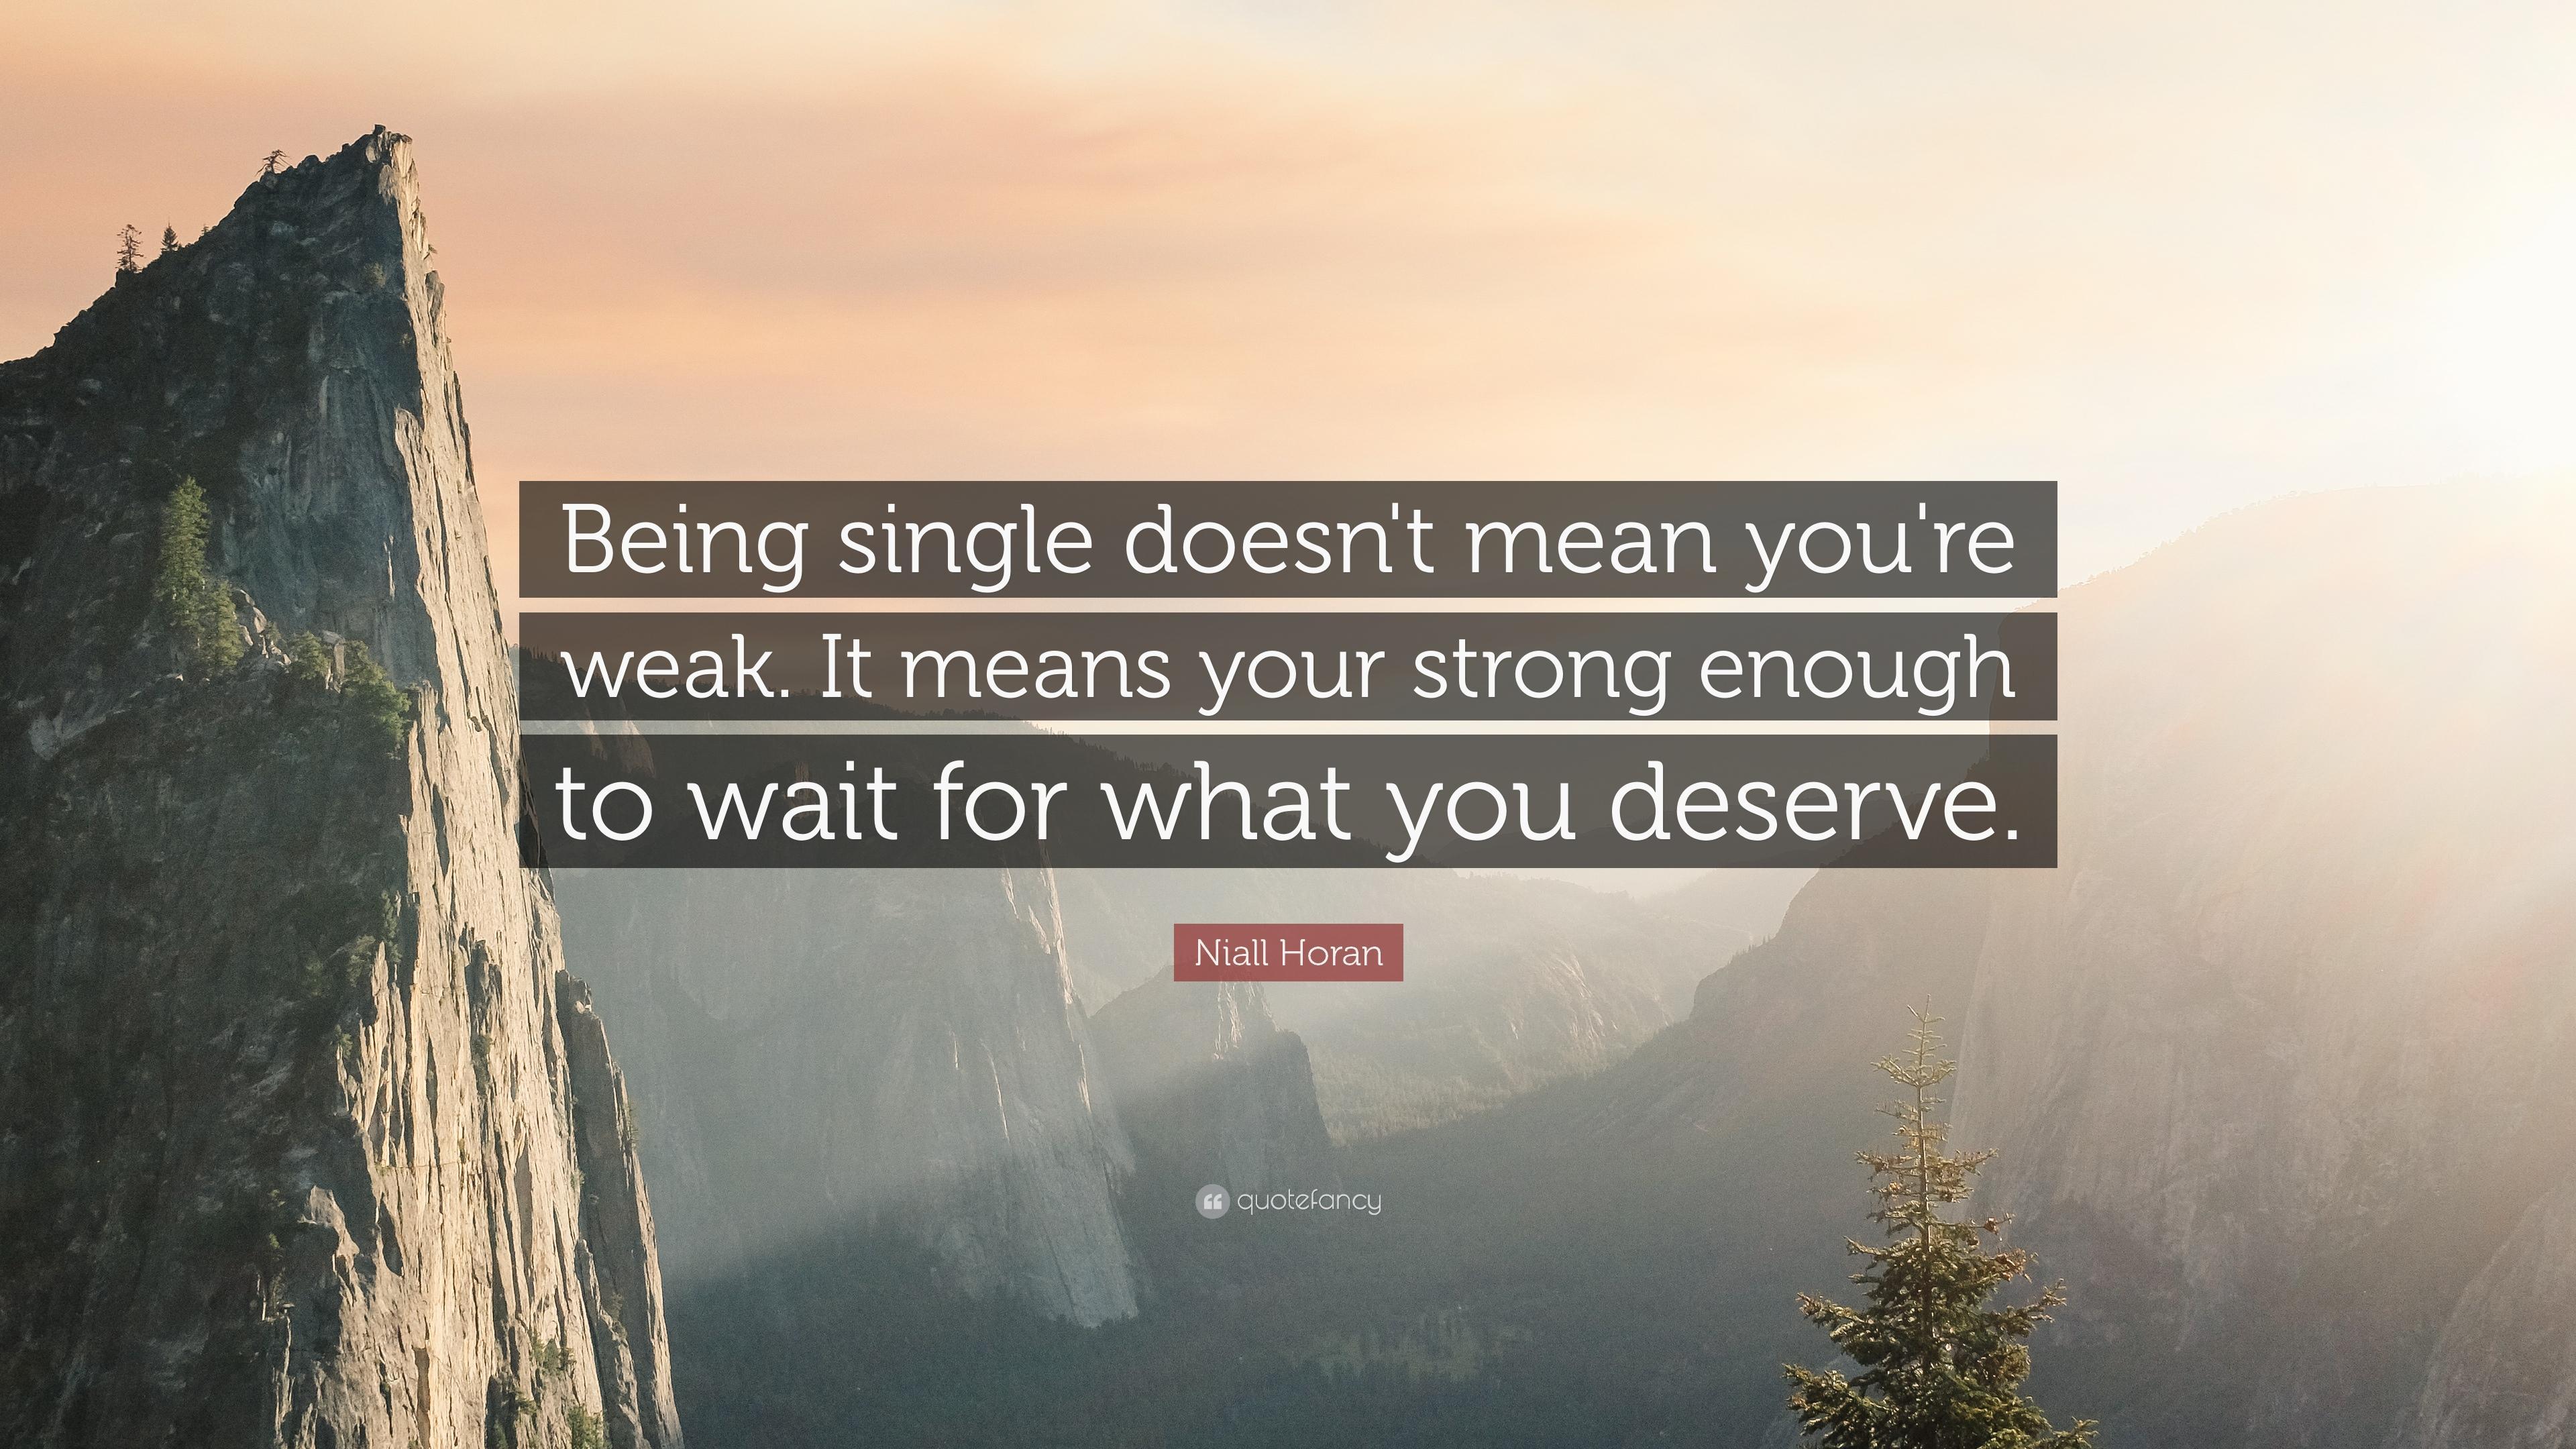 Niall Horan Quote: “Being single doesn't mean you're weak